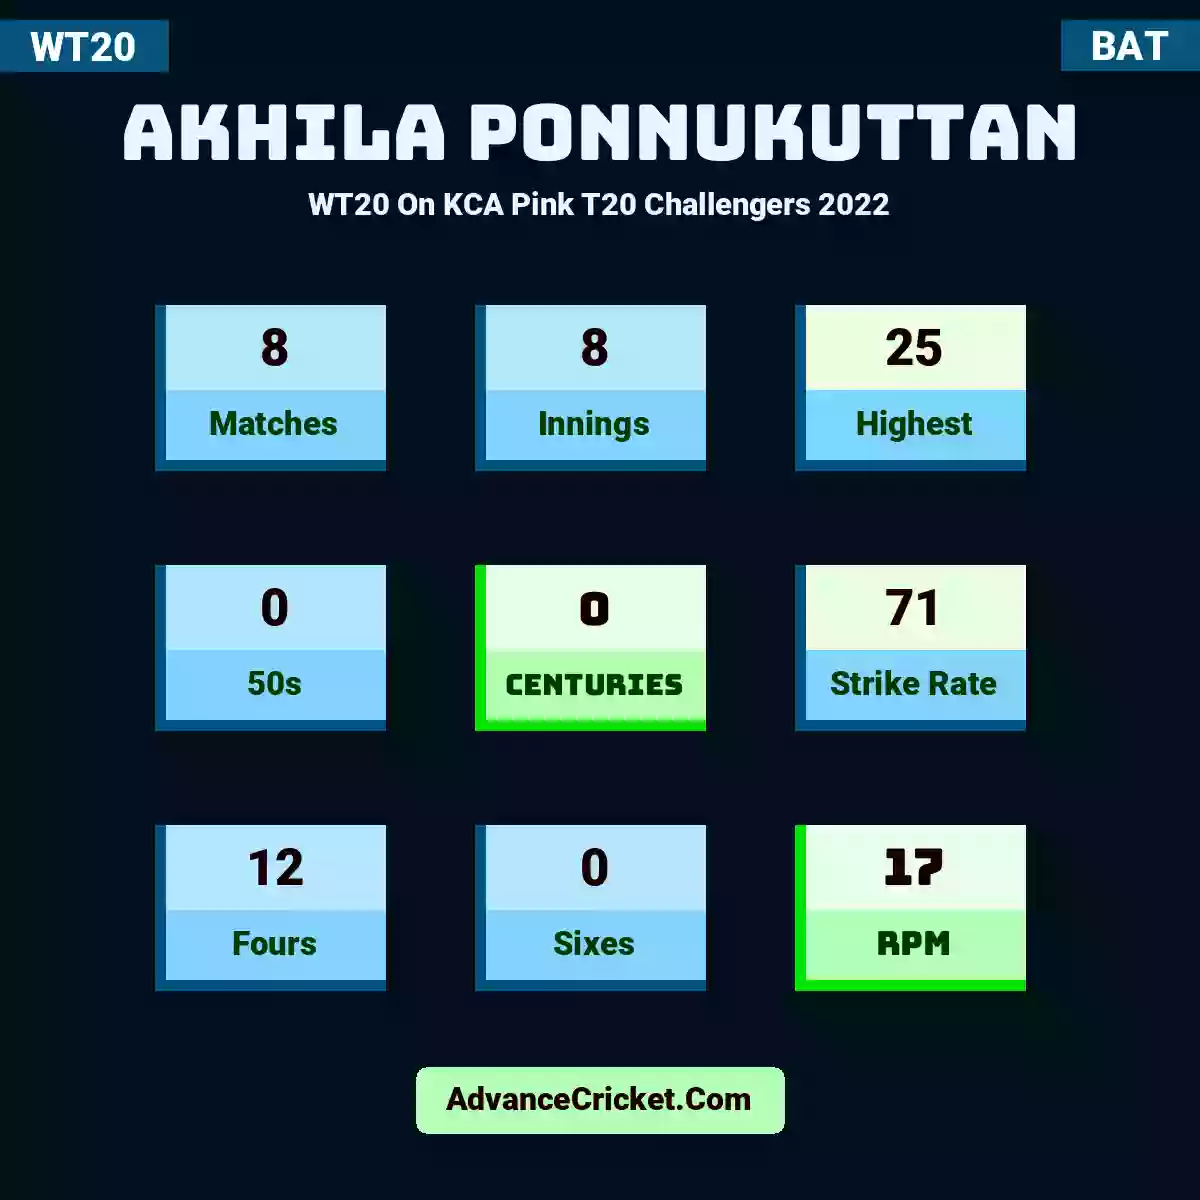 Akhila Ponnukuttan WT20  On KCA Pink T20 Challengers 2022, Akhila Ponnukuttan played 8 matches, scored 25 runs as highest, 0 half-centuries, and 0 centuries, with a strike rate of 71. A.Ponnukuttan hit 12 fours and 0 sixes, with an RPM of 17.